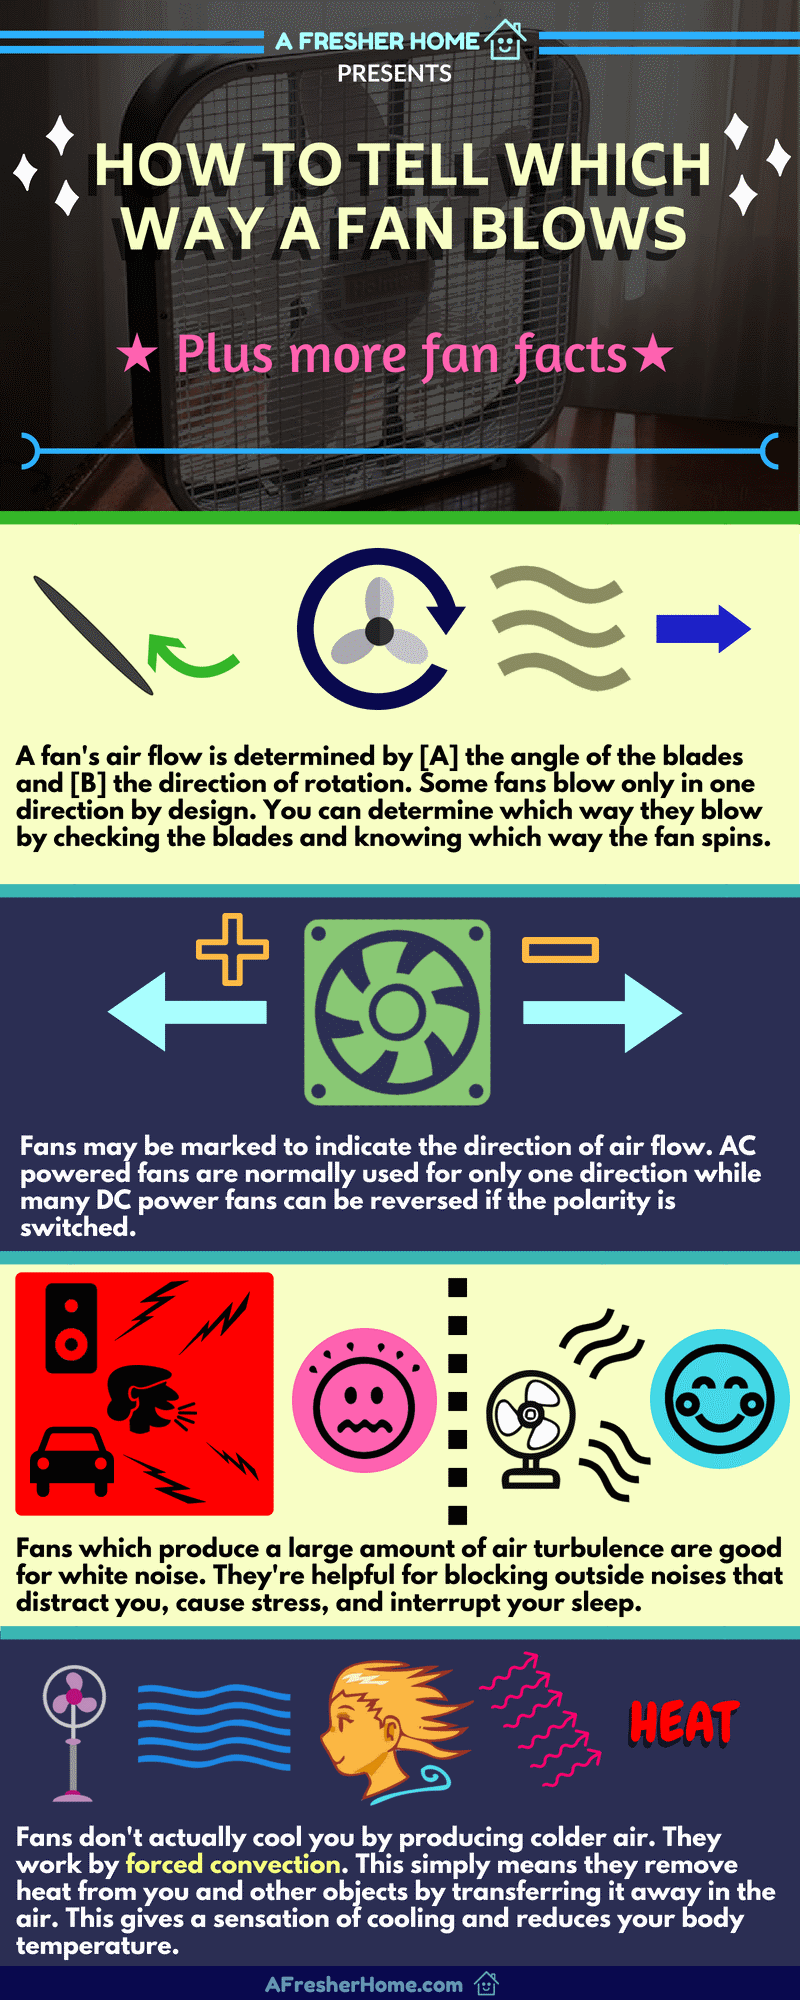 How a fan blows and fan facts infographic